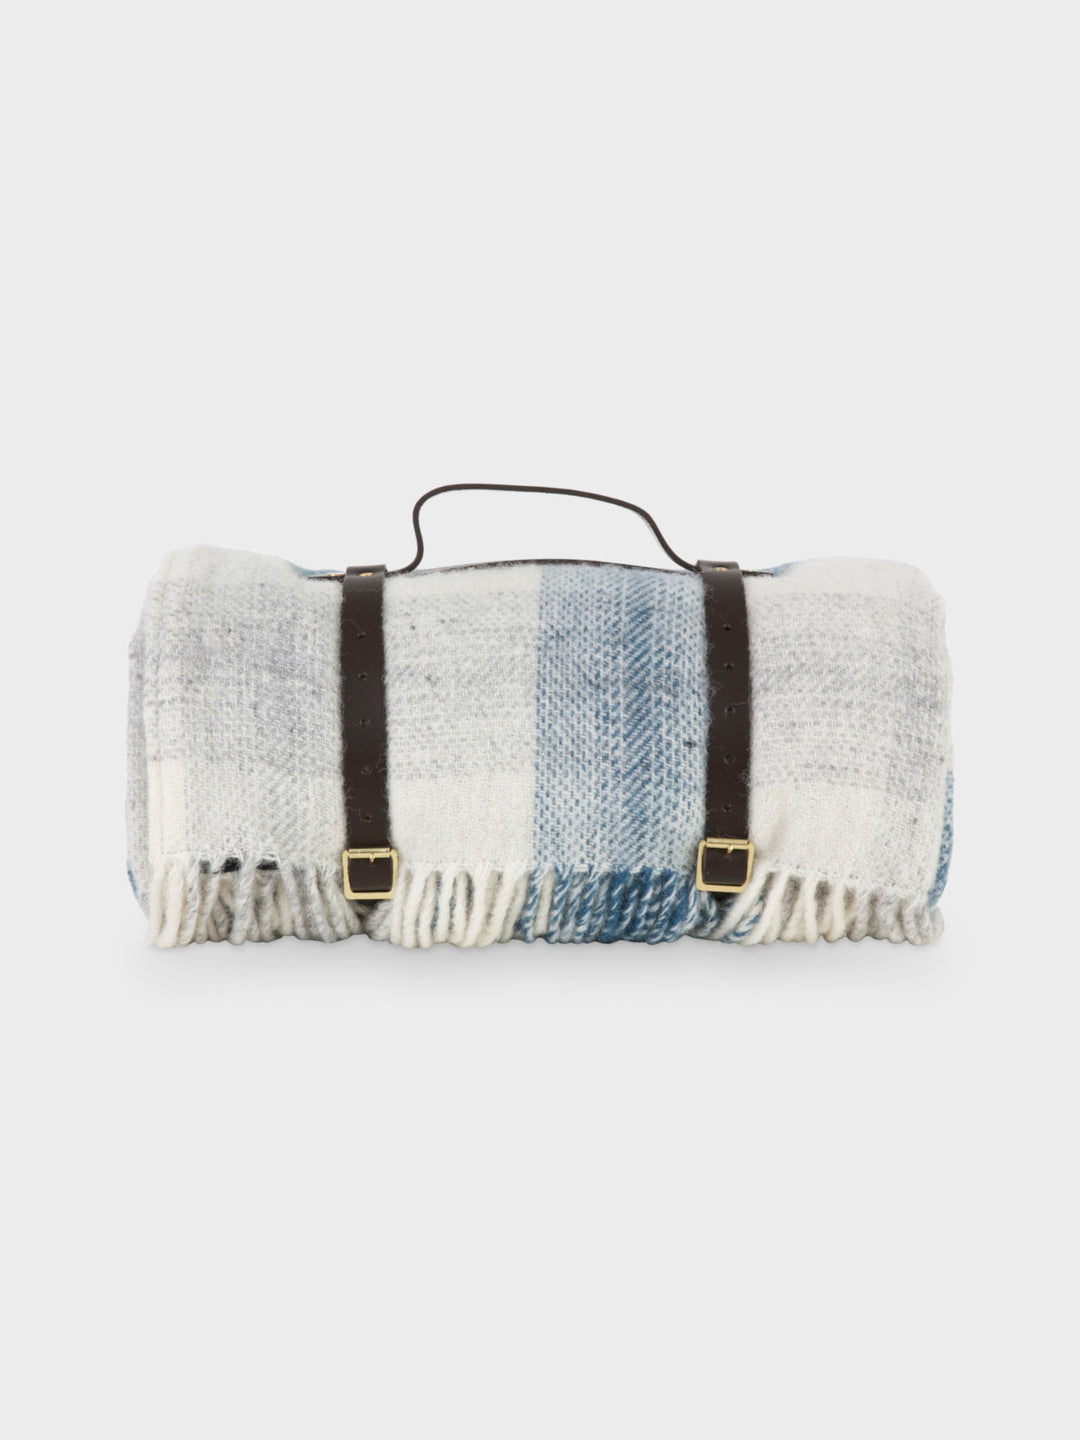 A blue and white wool picnic rug by The British Blanket Company. The picnic rug is rolled up with leather straps and a handle.